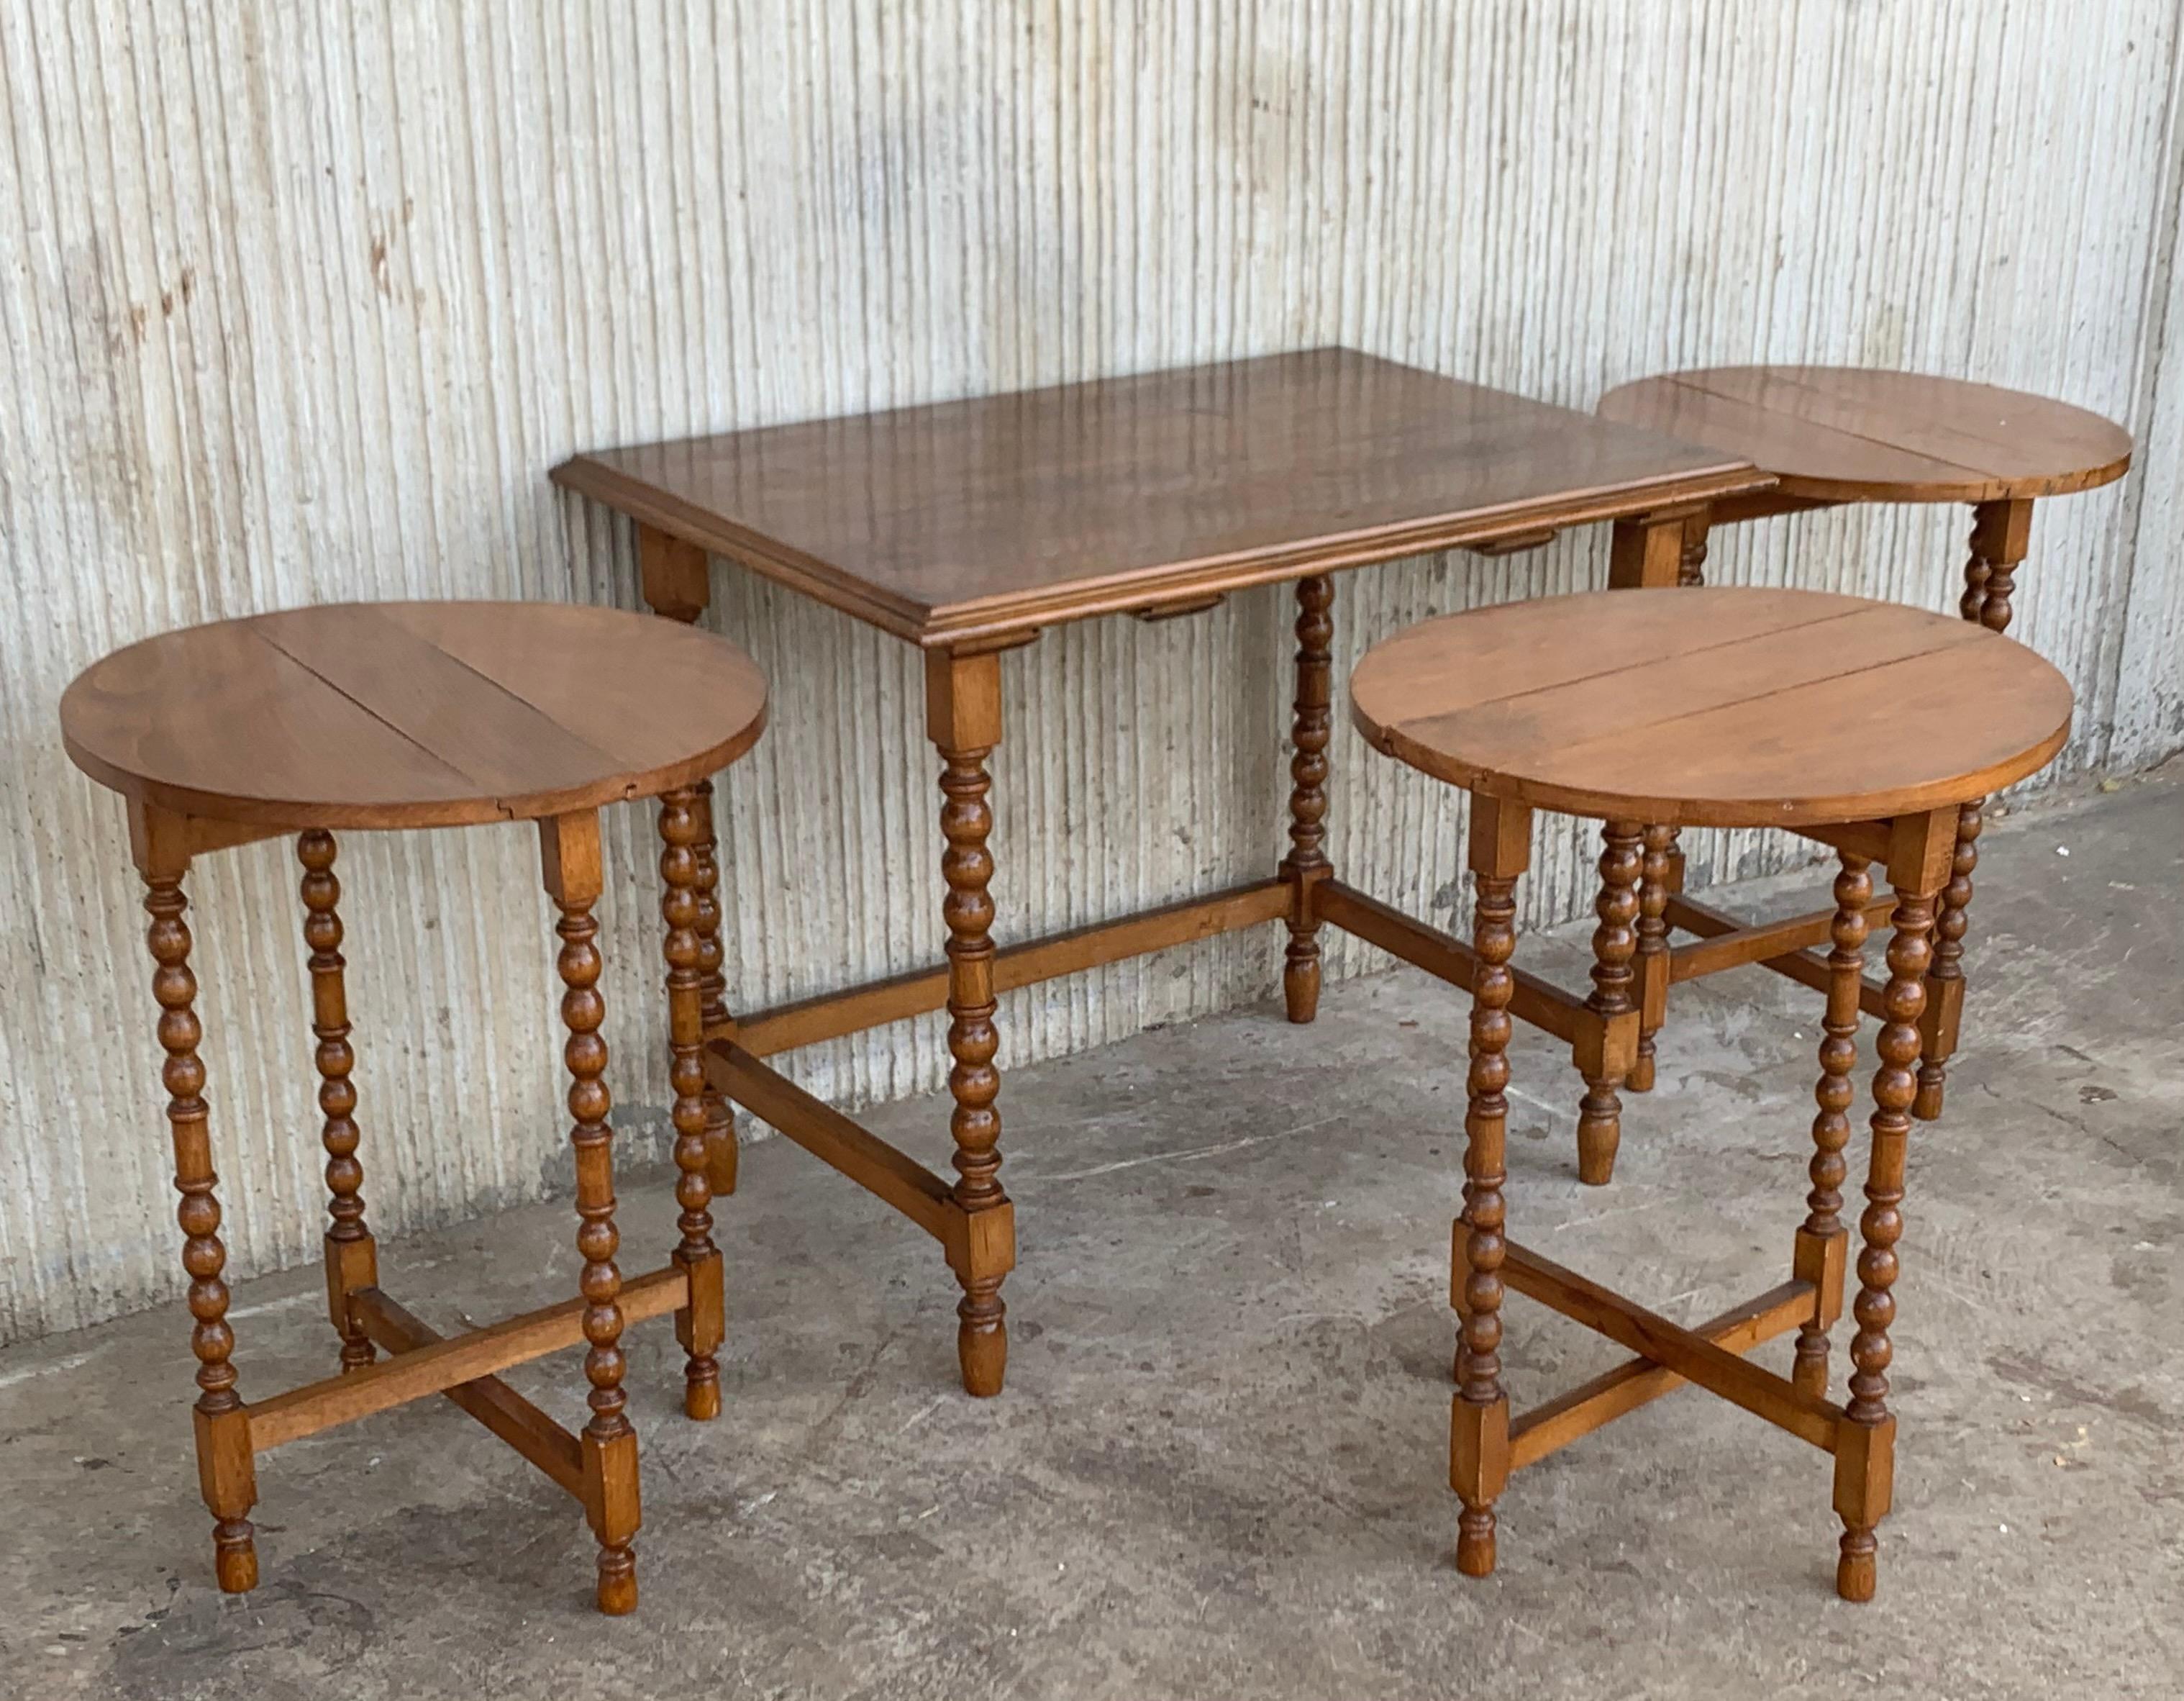 20th Spanish walnut nesting tables with turned legs

Carved and turned side tables. The set has a rectangular table with three round side and folding tables

Each round table is 15.55in diameter.